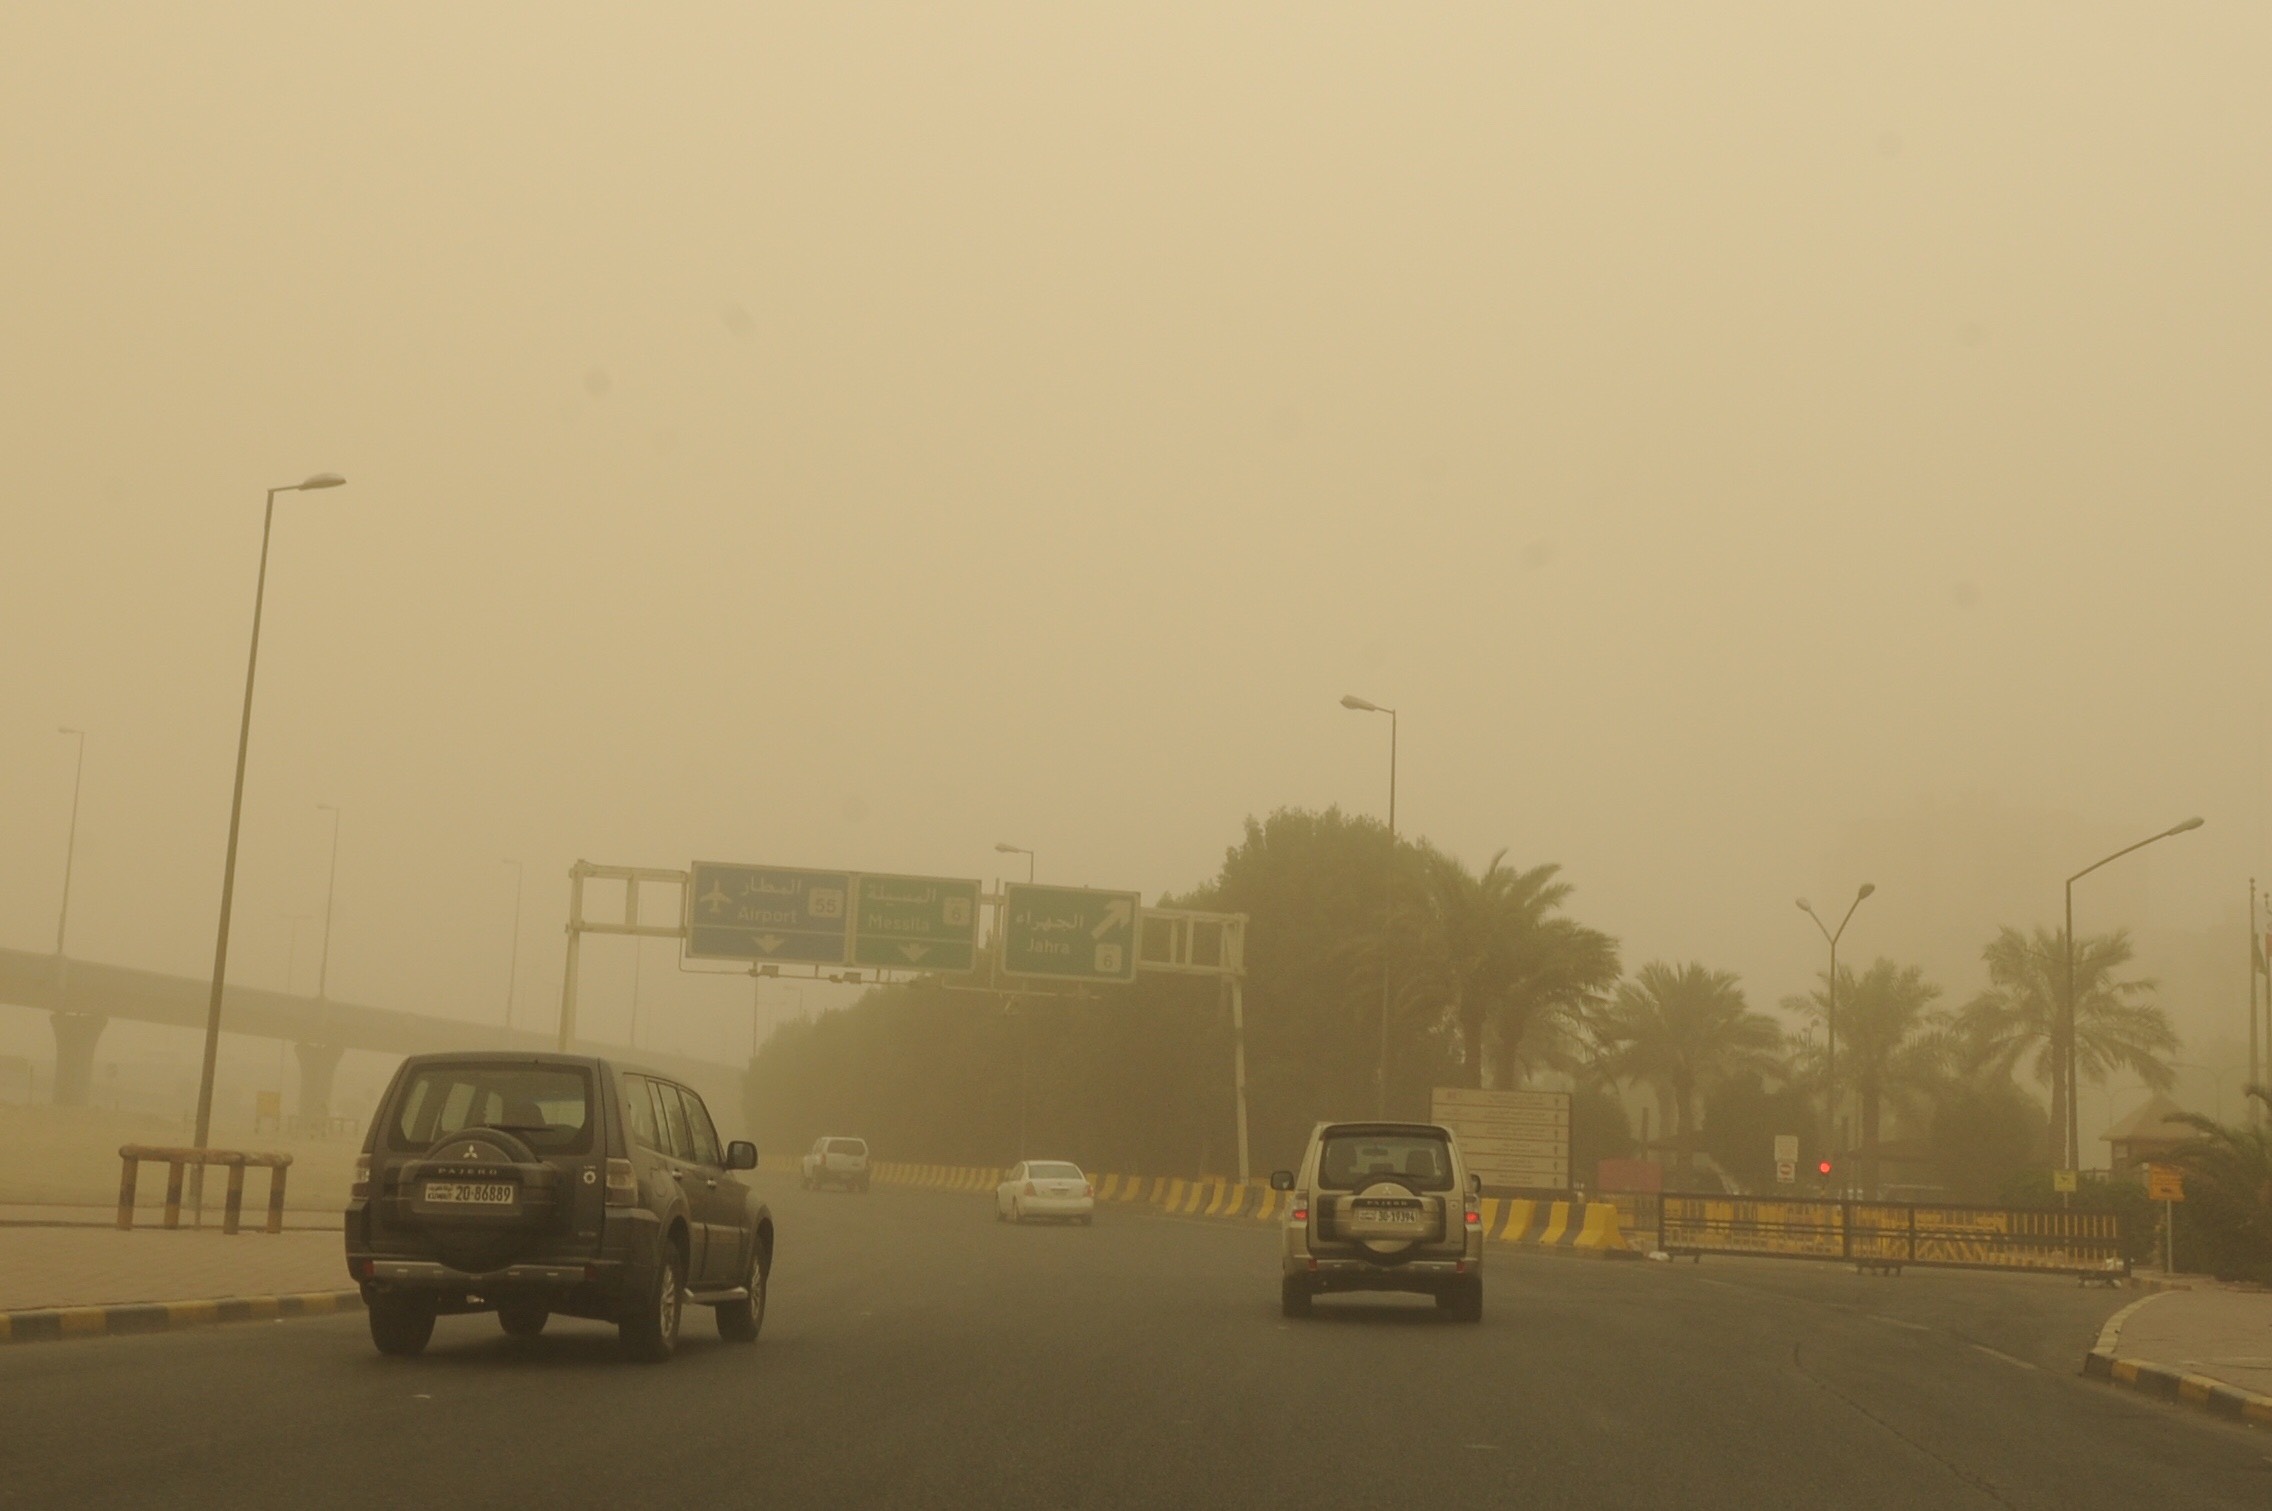 Visibility decreased due to strong winds carrying heavy dust